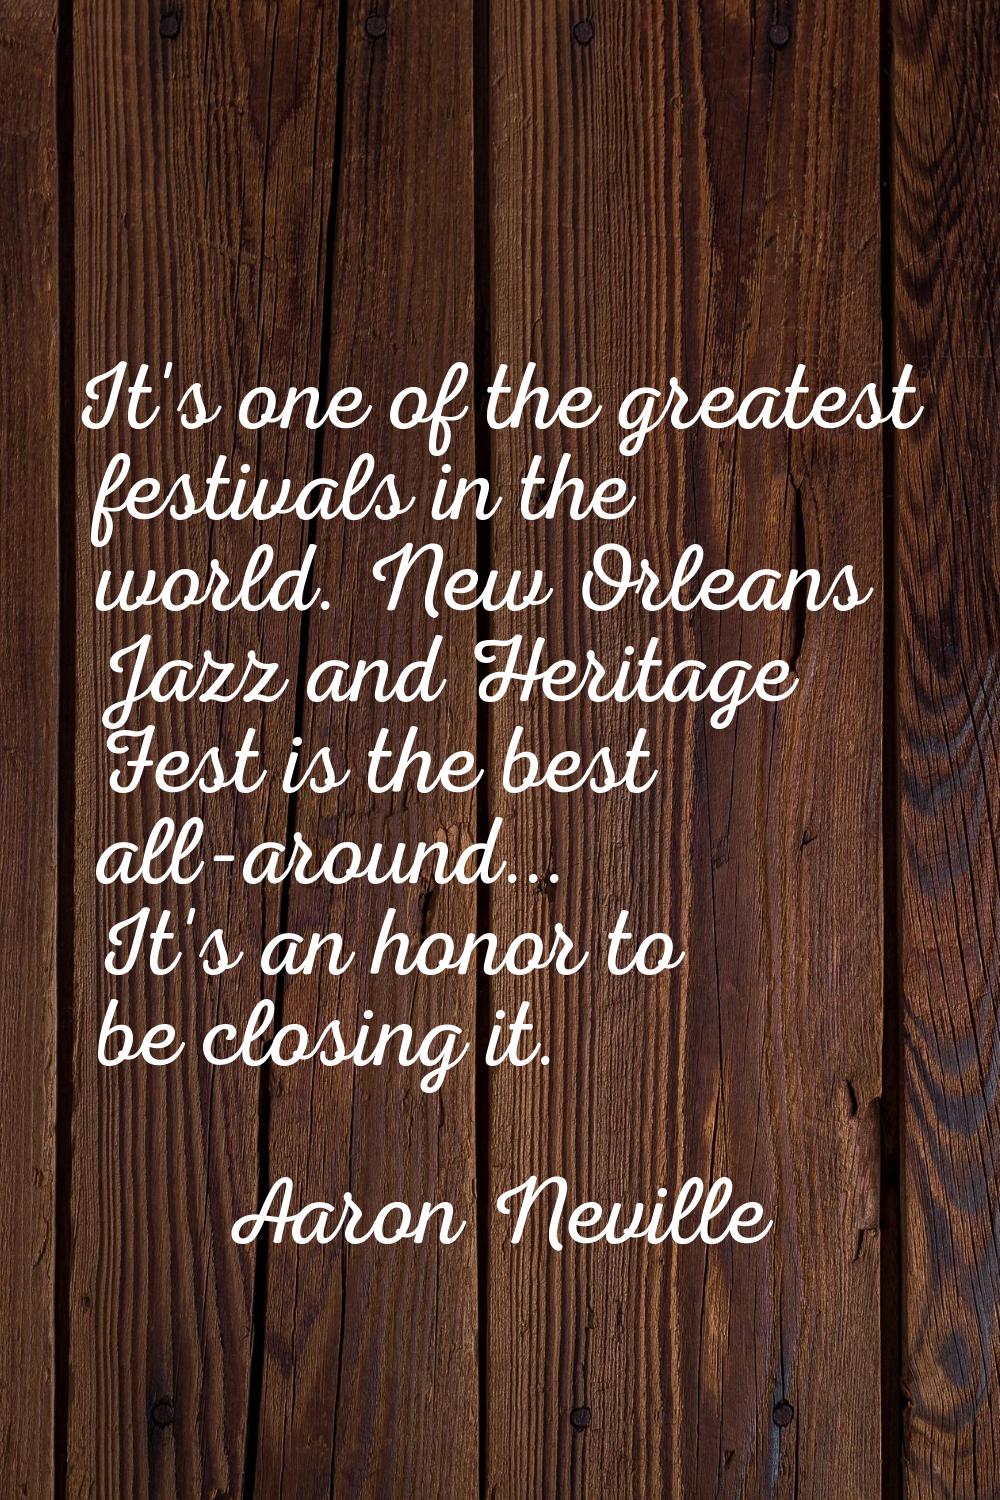 It's one of the greatest festivals in the world. New Orleans Jazz and Heritage Fest is the best all